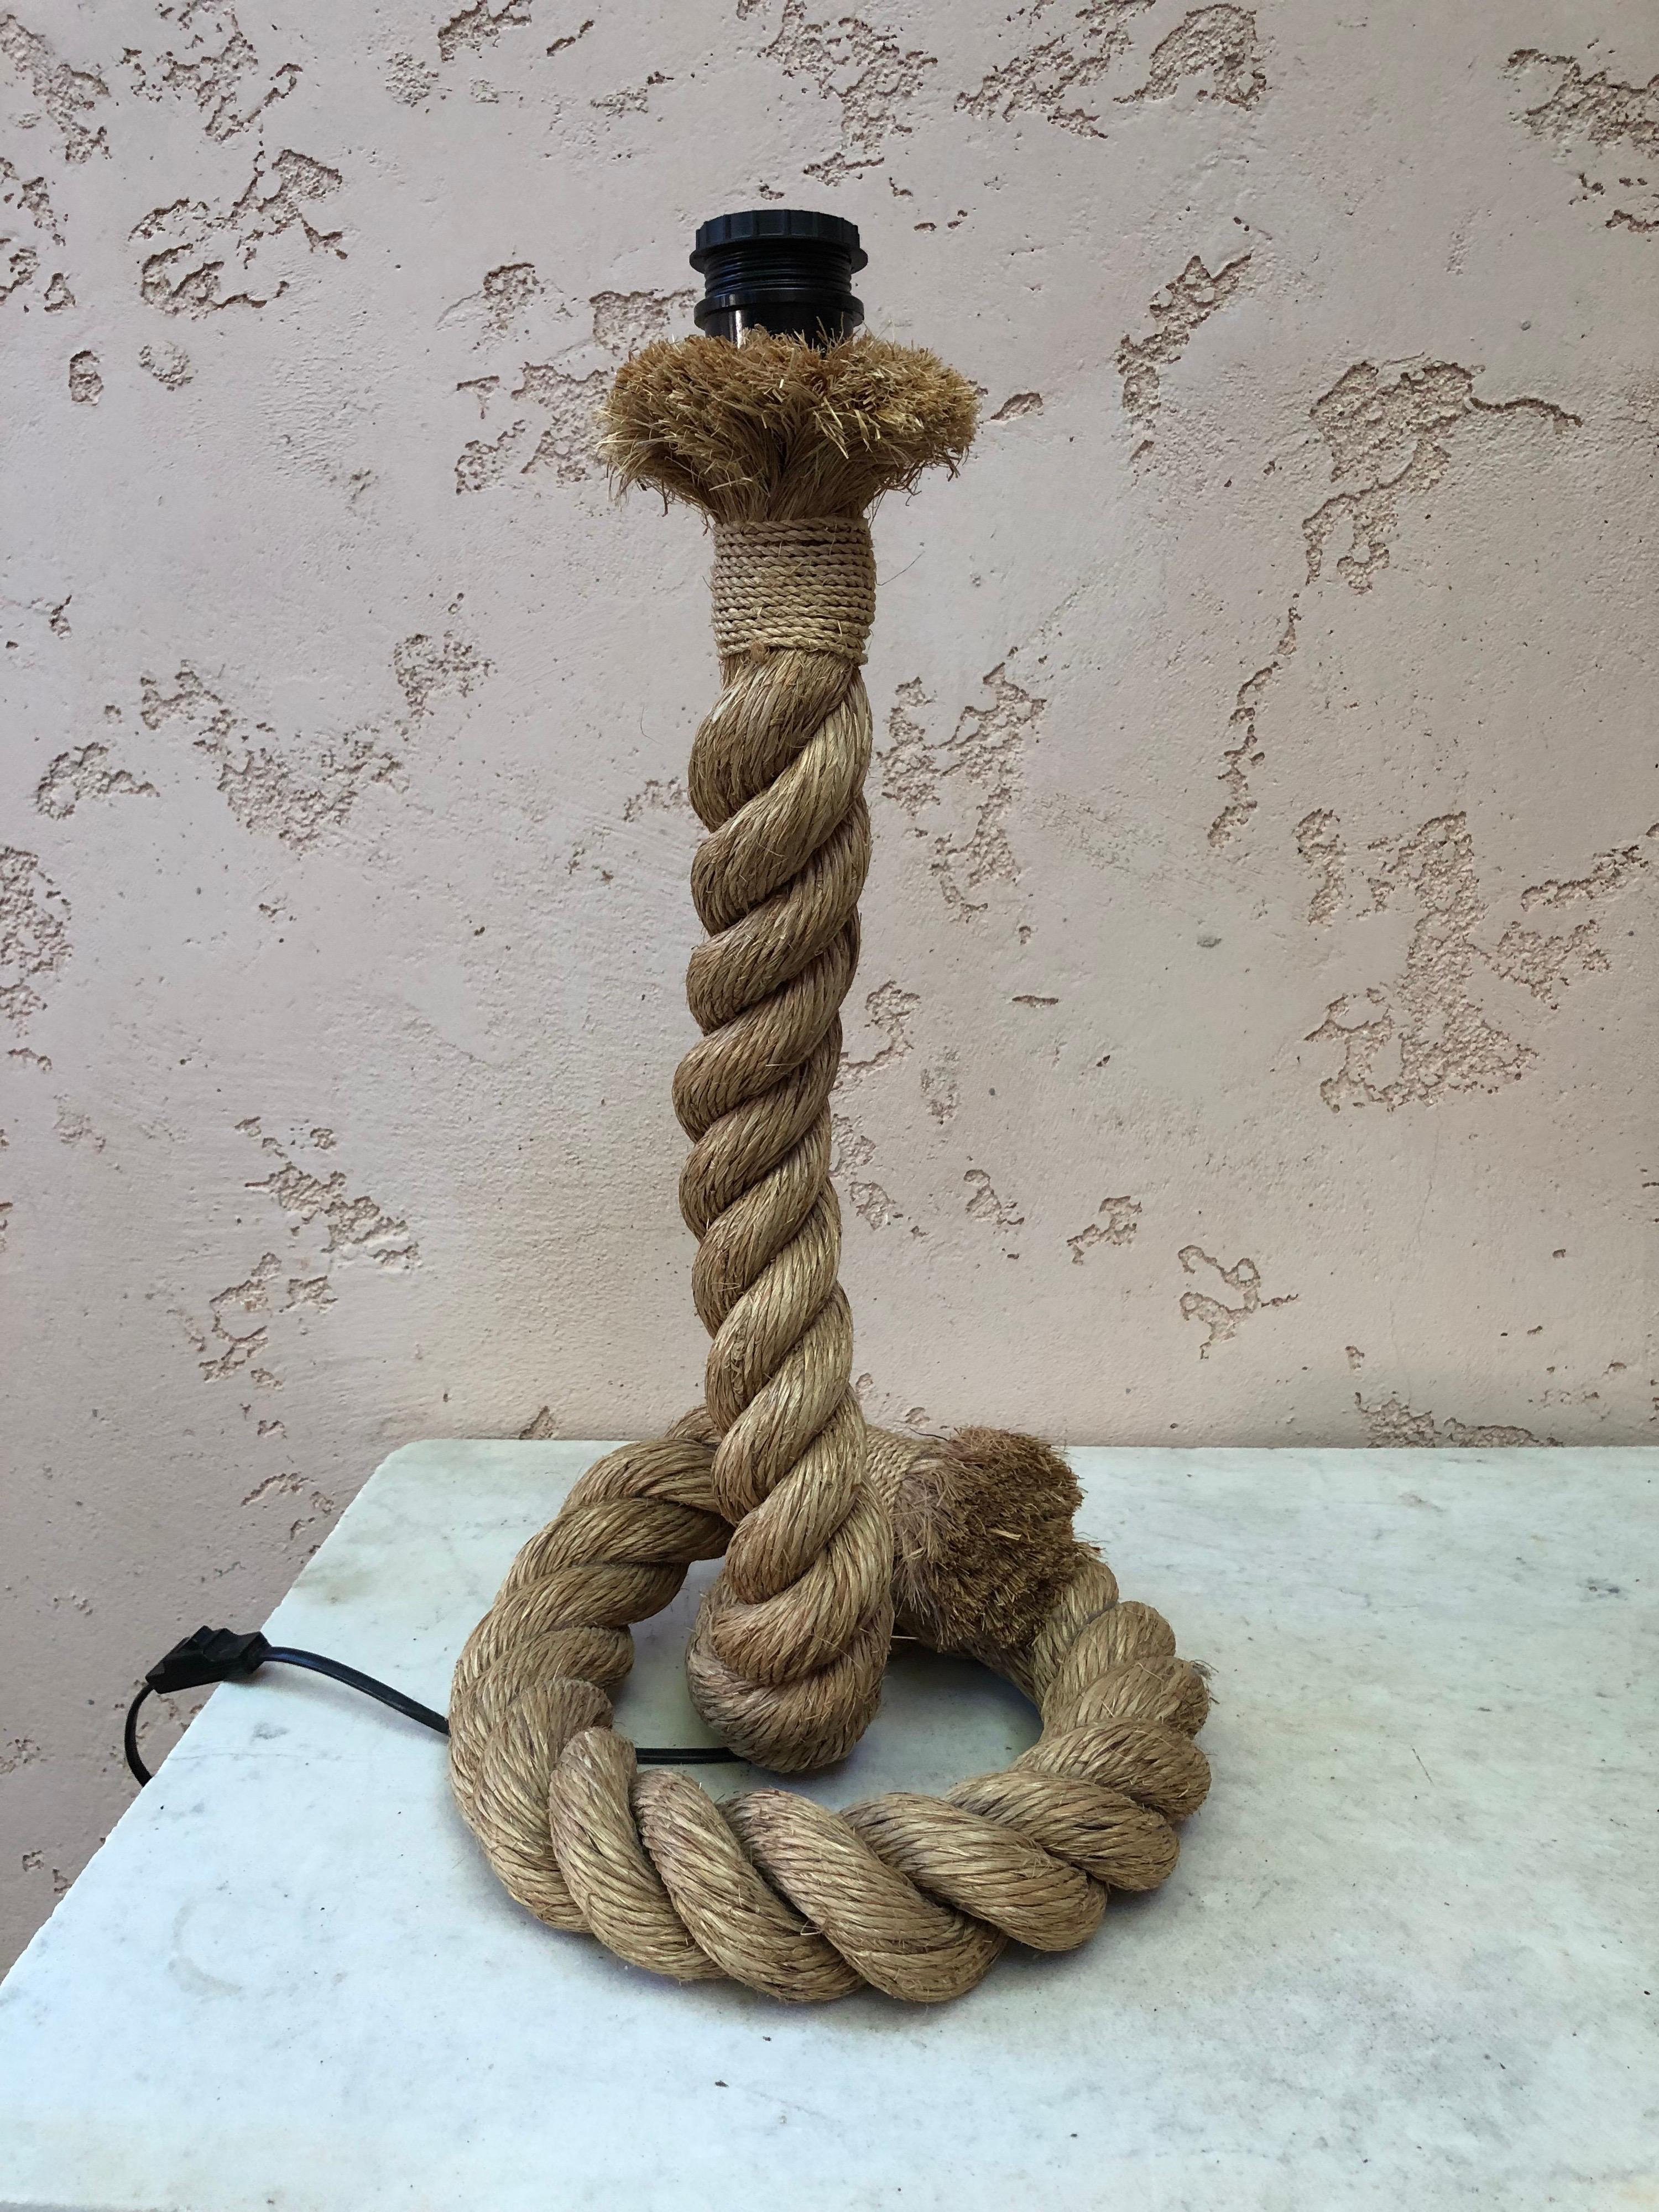 Large Midcentury rope lamp Audoux Minet, circa 1960.
Measure: Height / 19.3 inches.